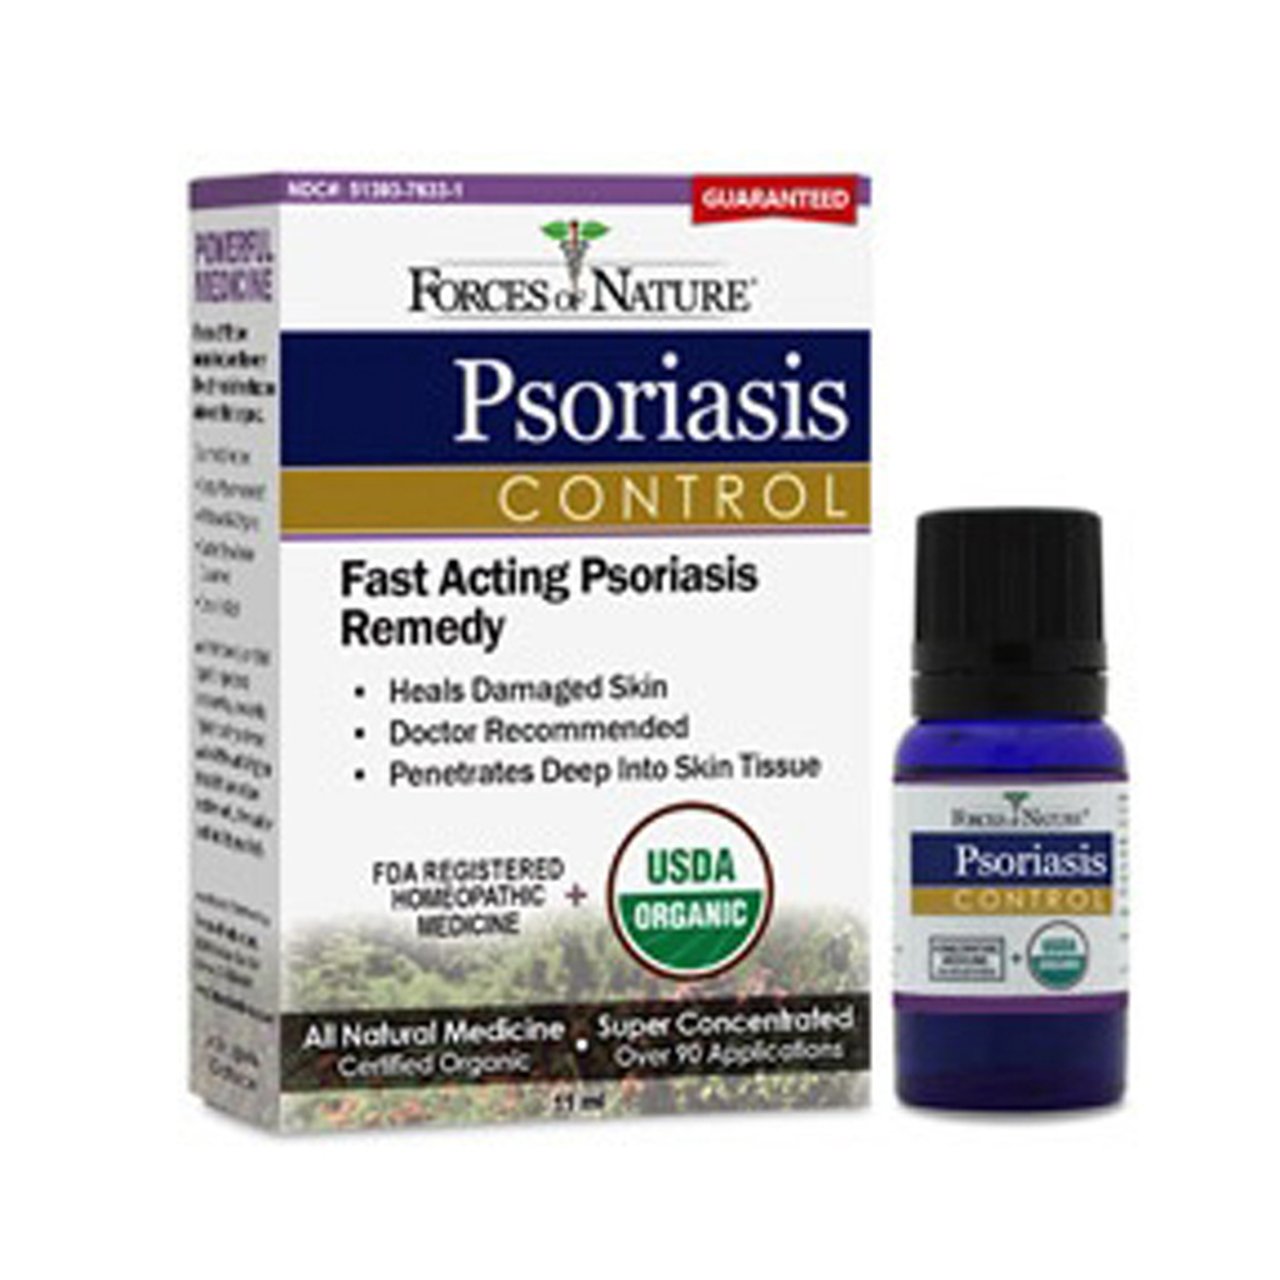 Forces Of Nature Psoriasis Control